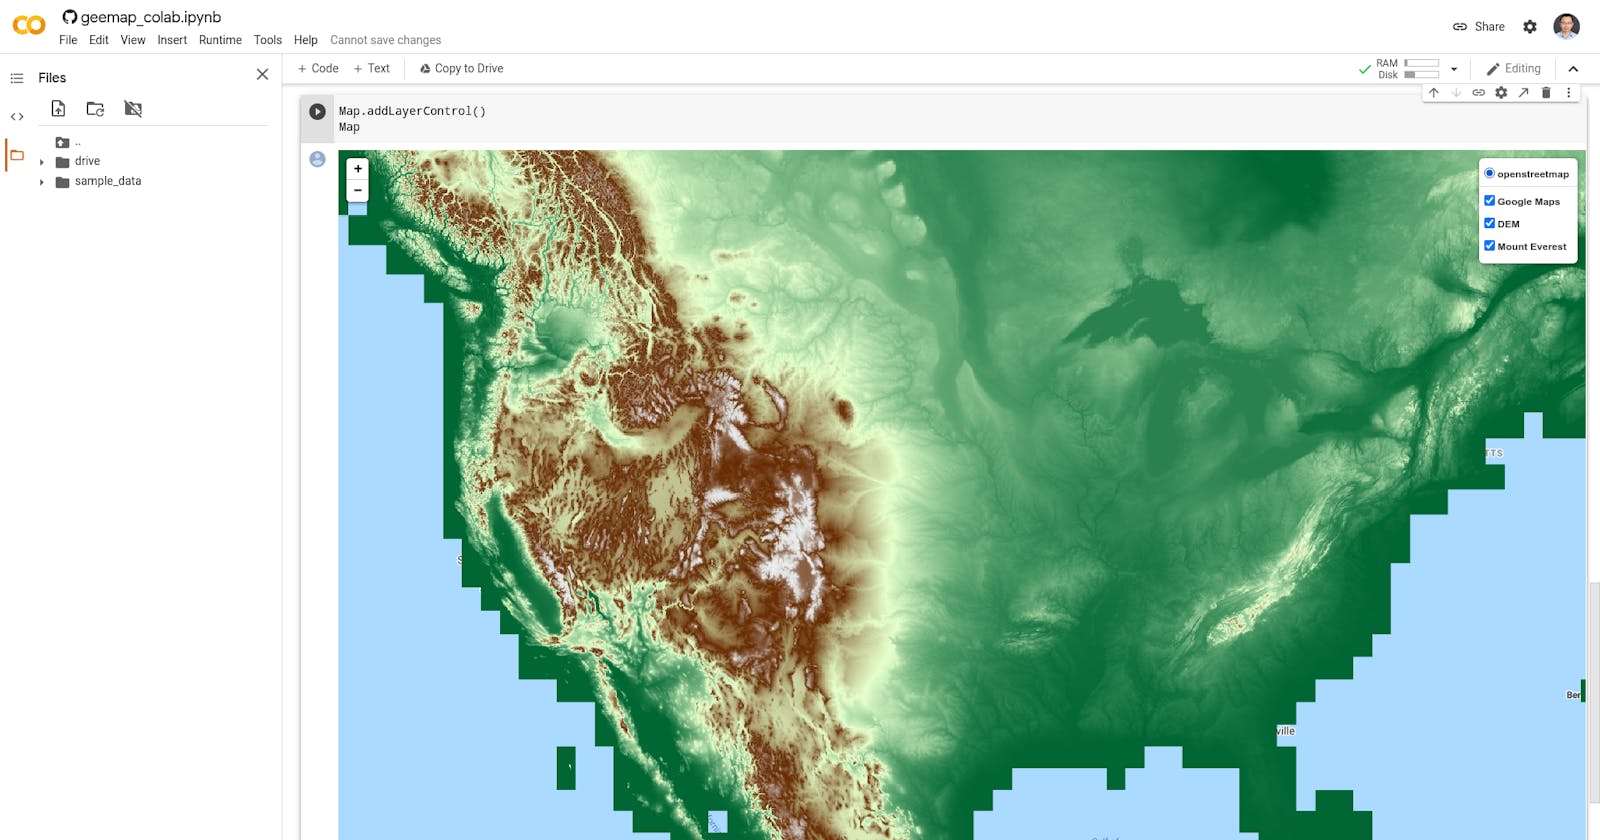 Earth Engine Tutorial #35: How to use geemap and Earth Engine in Google Colab